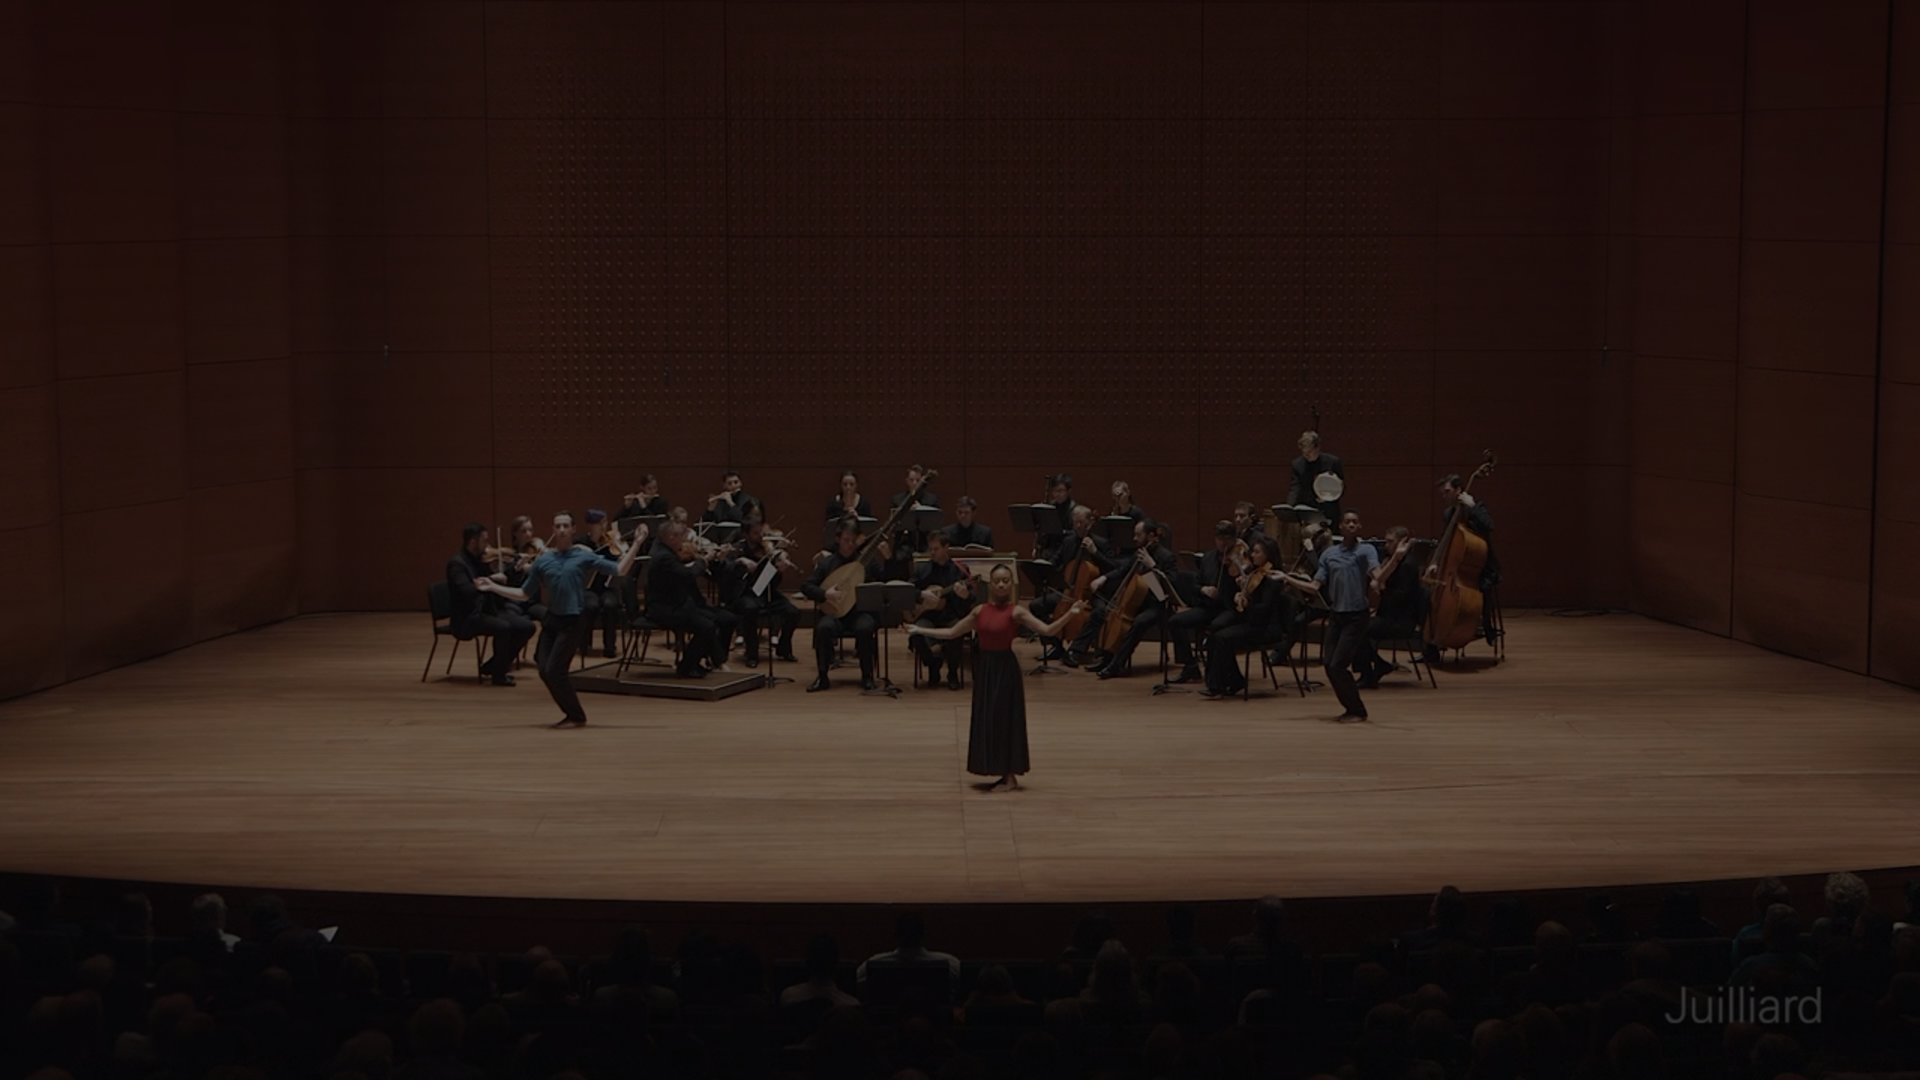 Video feature about the Terpsichore artistic collaboration between Juilliard Historical Performance and Dance divisions